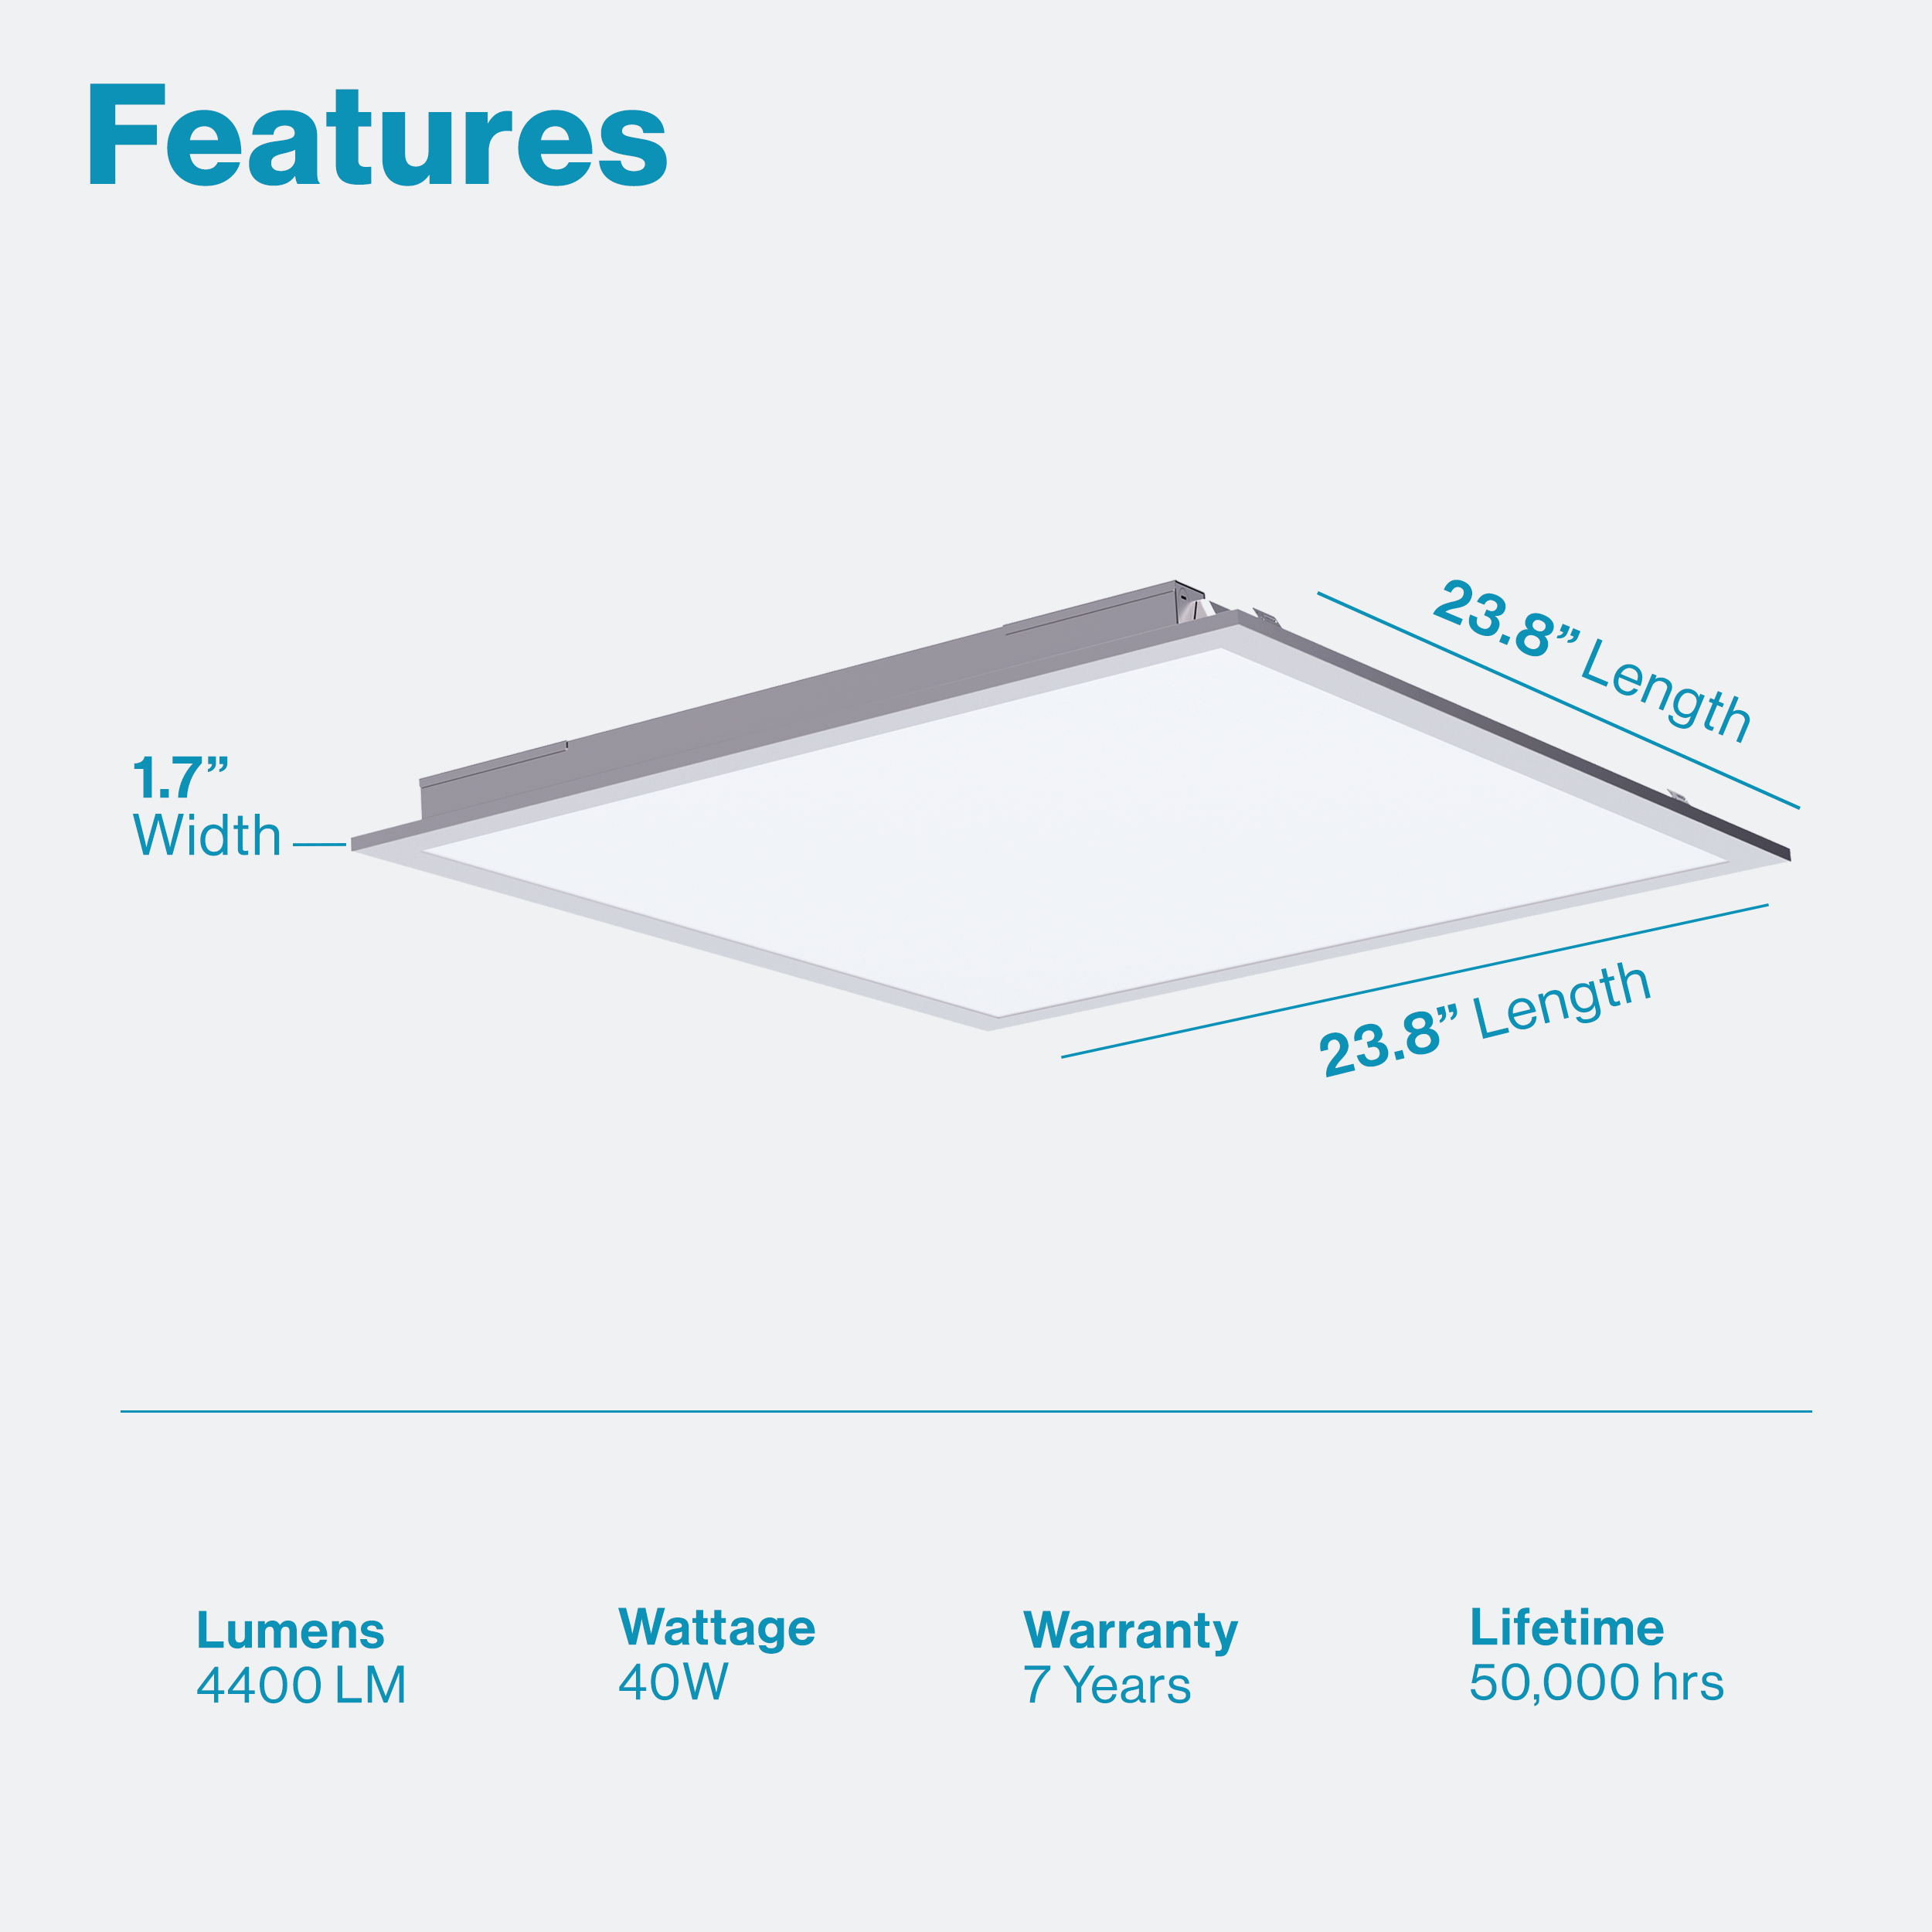 This 40W 2x2 Sunco Lighting Ceiling Panel is 1.7" wide/23.8" long. Features 50,000 Lifetime hours, 4400 Lumens, and a 7 year warranty.